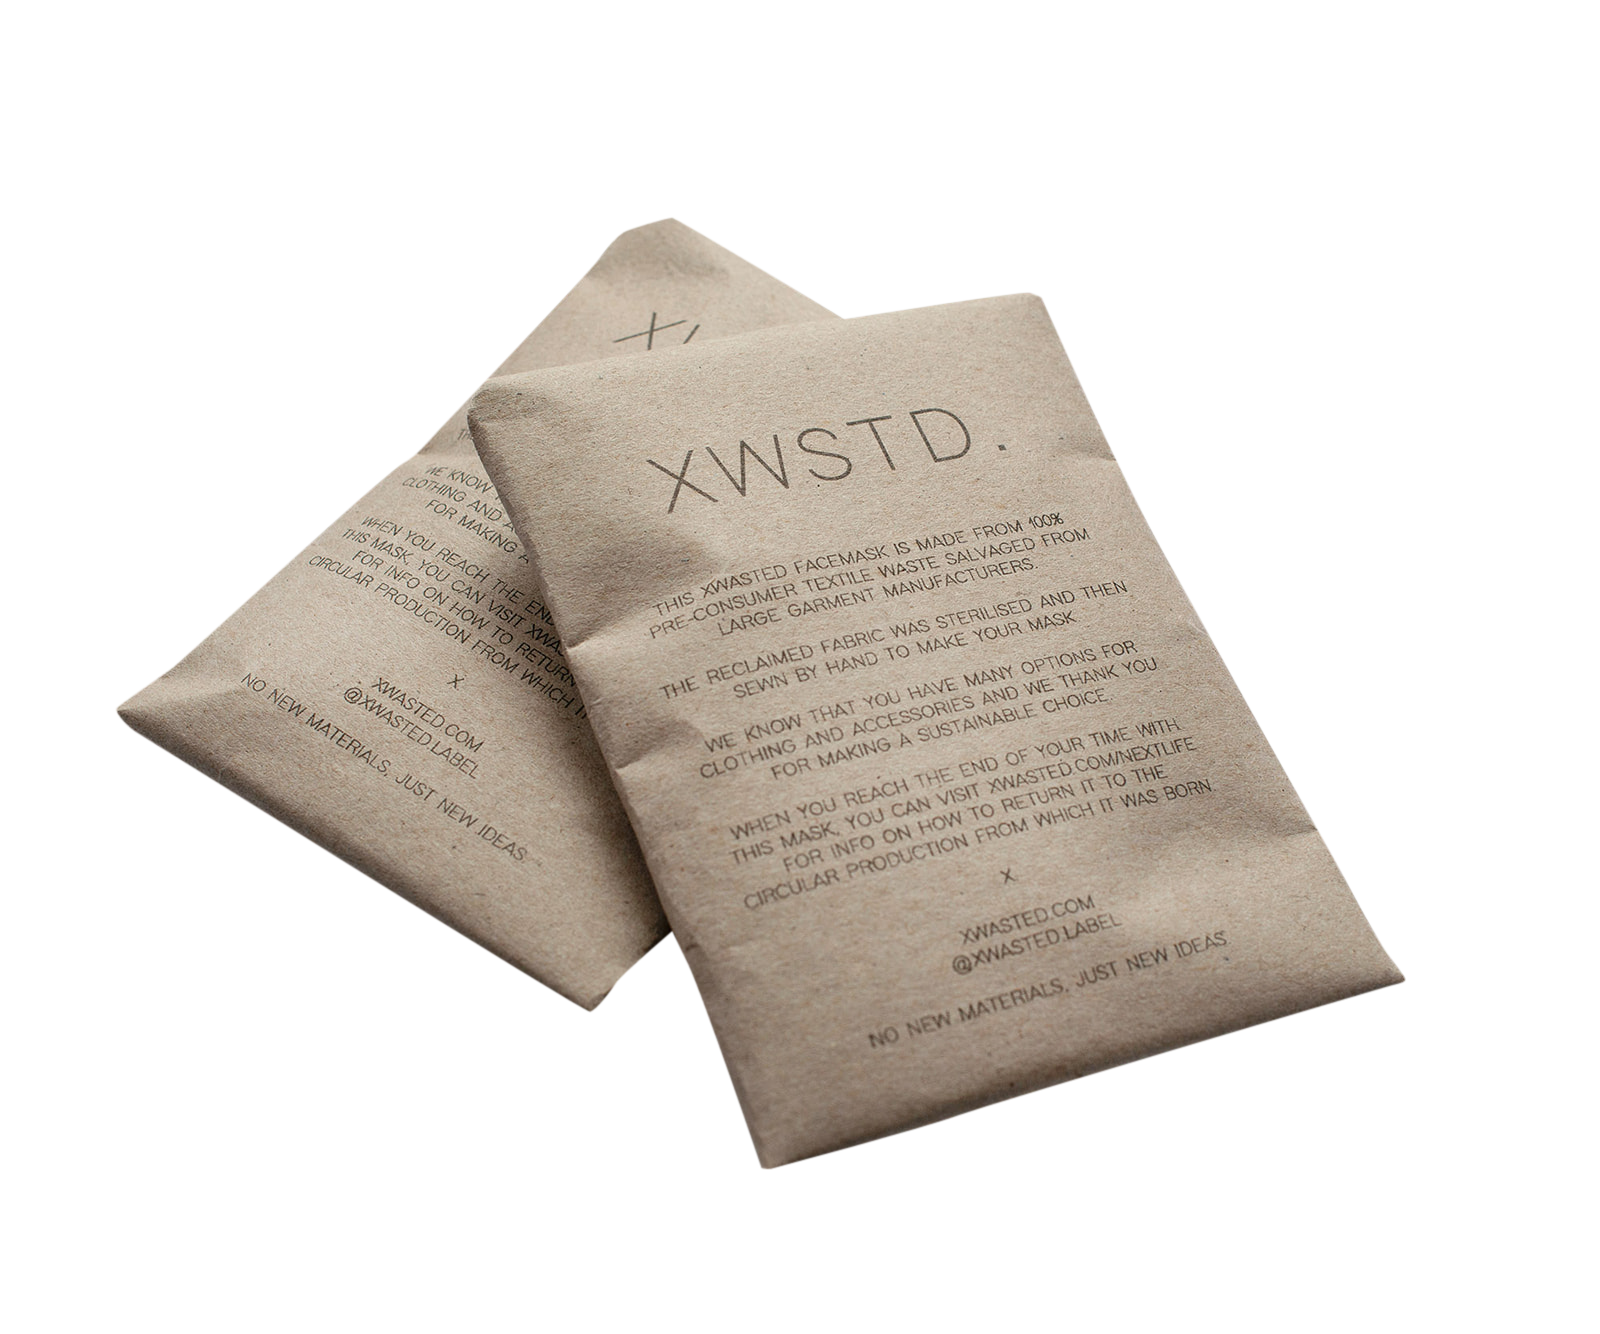 XWASTED facemask recycled packaging